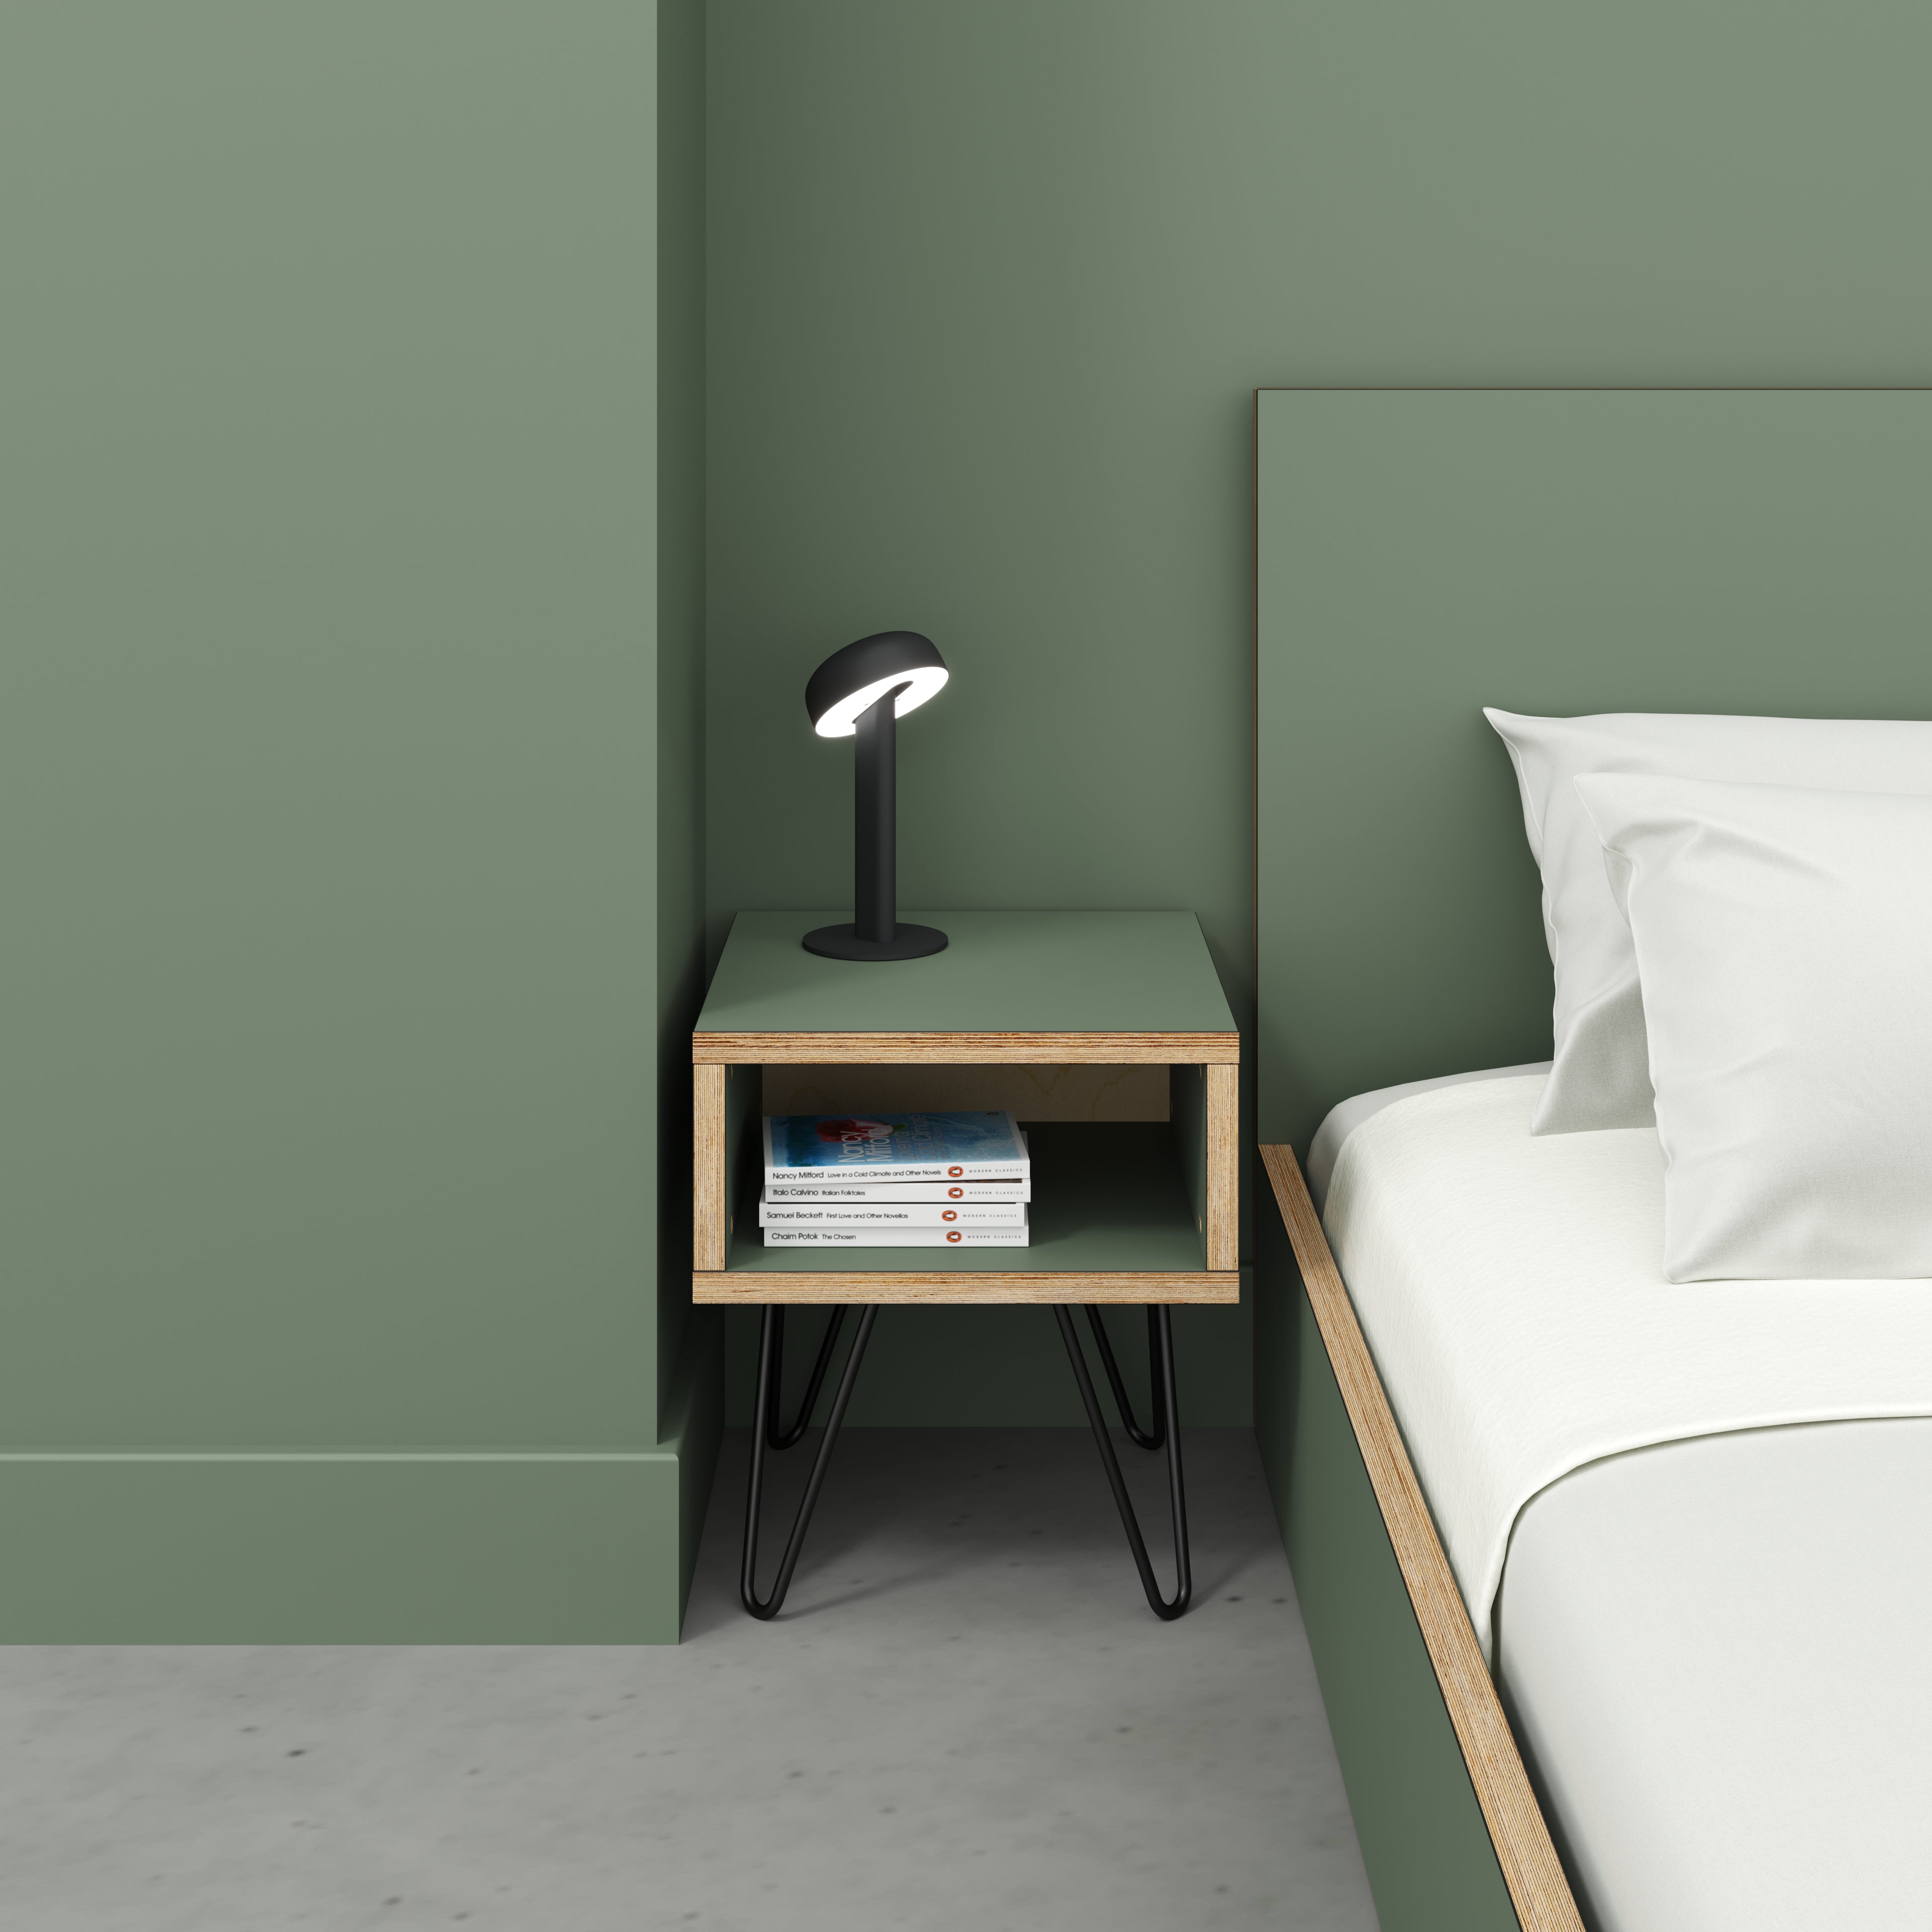 Bedside Table with Box Storage and Black Hairpin Legs - Formica Green Slate - 400(w) x 400(d) x 450(h)